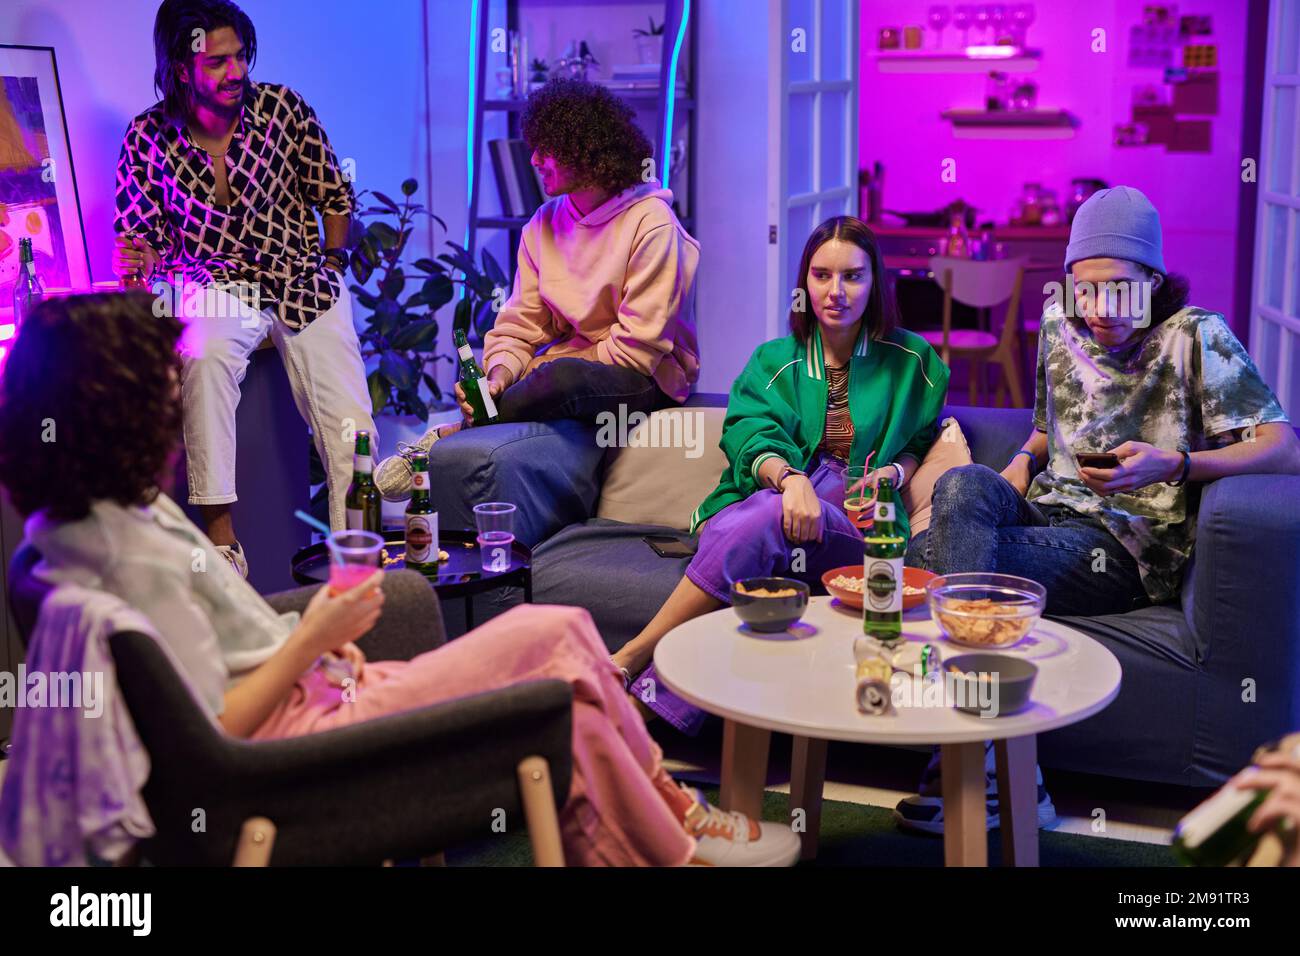 Group of youthful friends in casualwear having drinks while relaxing in living room lit by neon light and enjoying home party Stock Photo